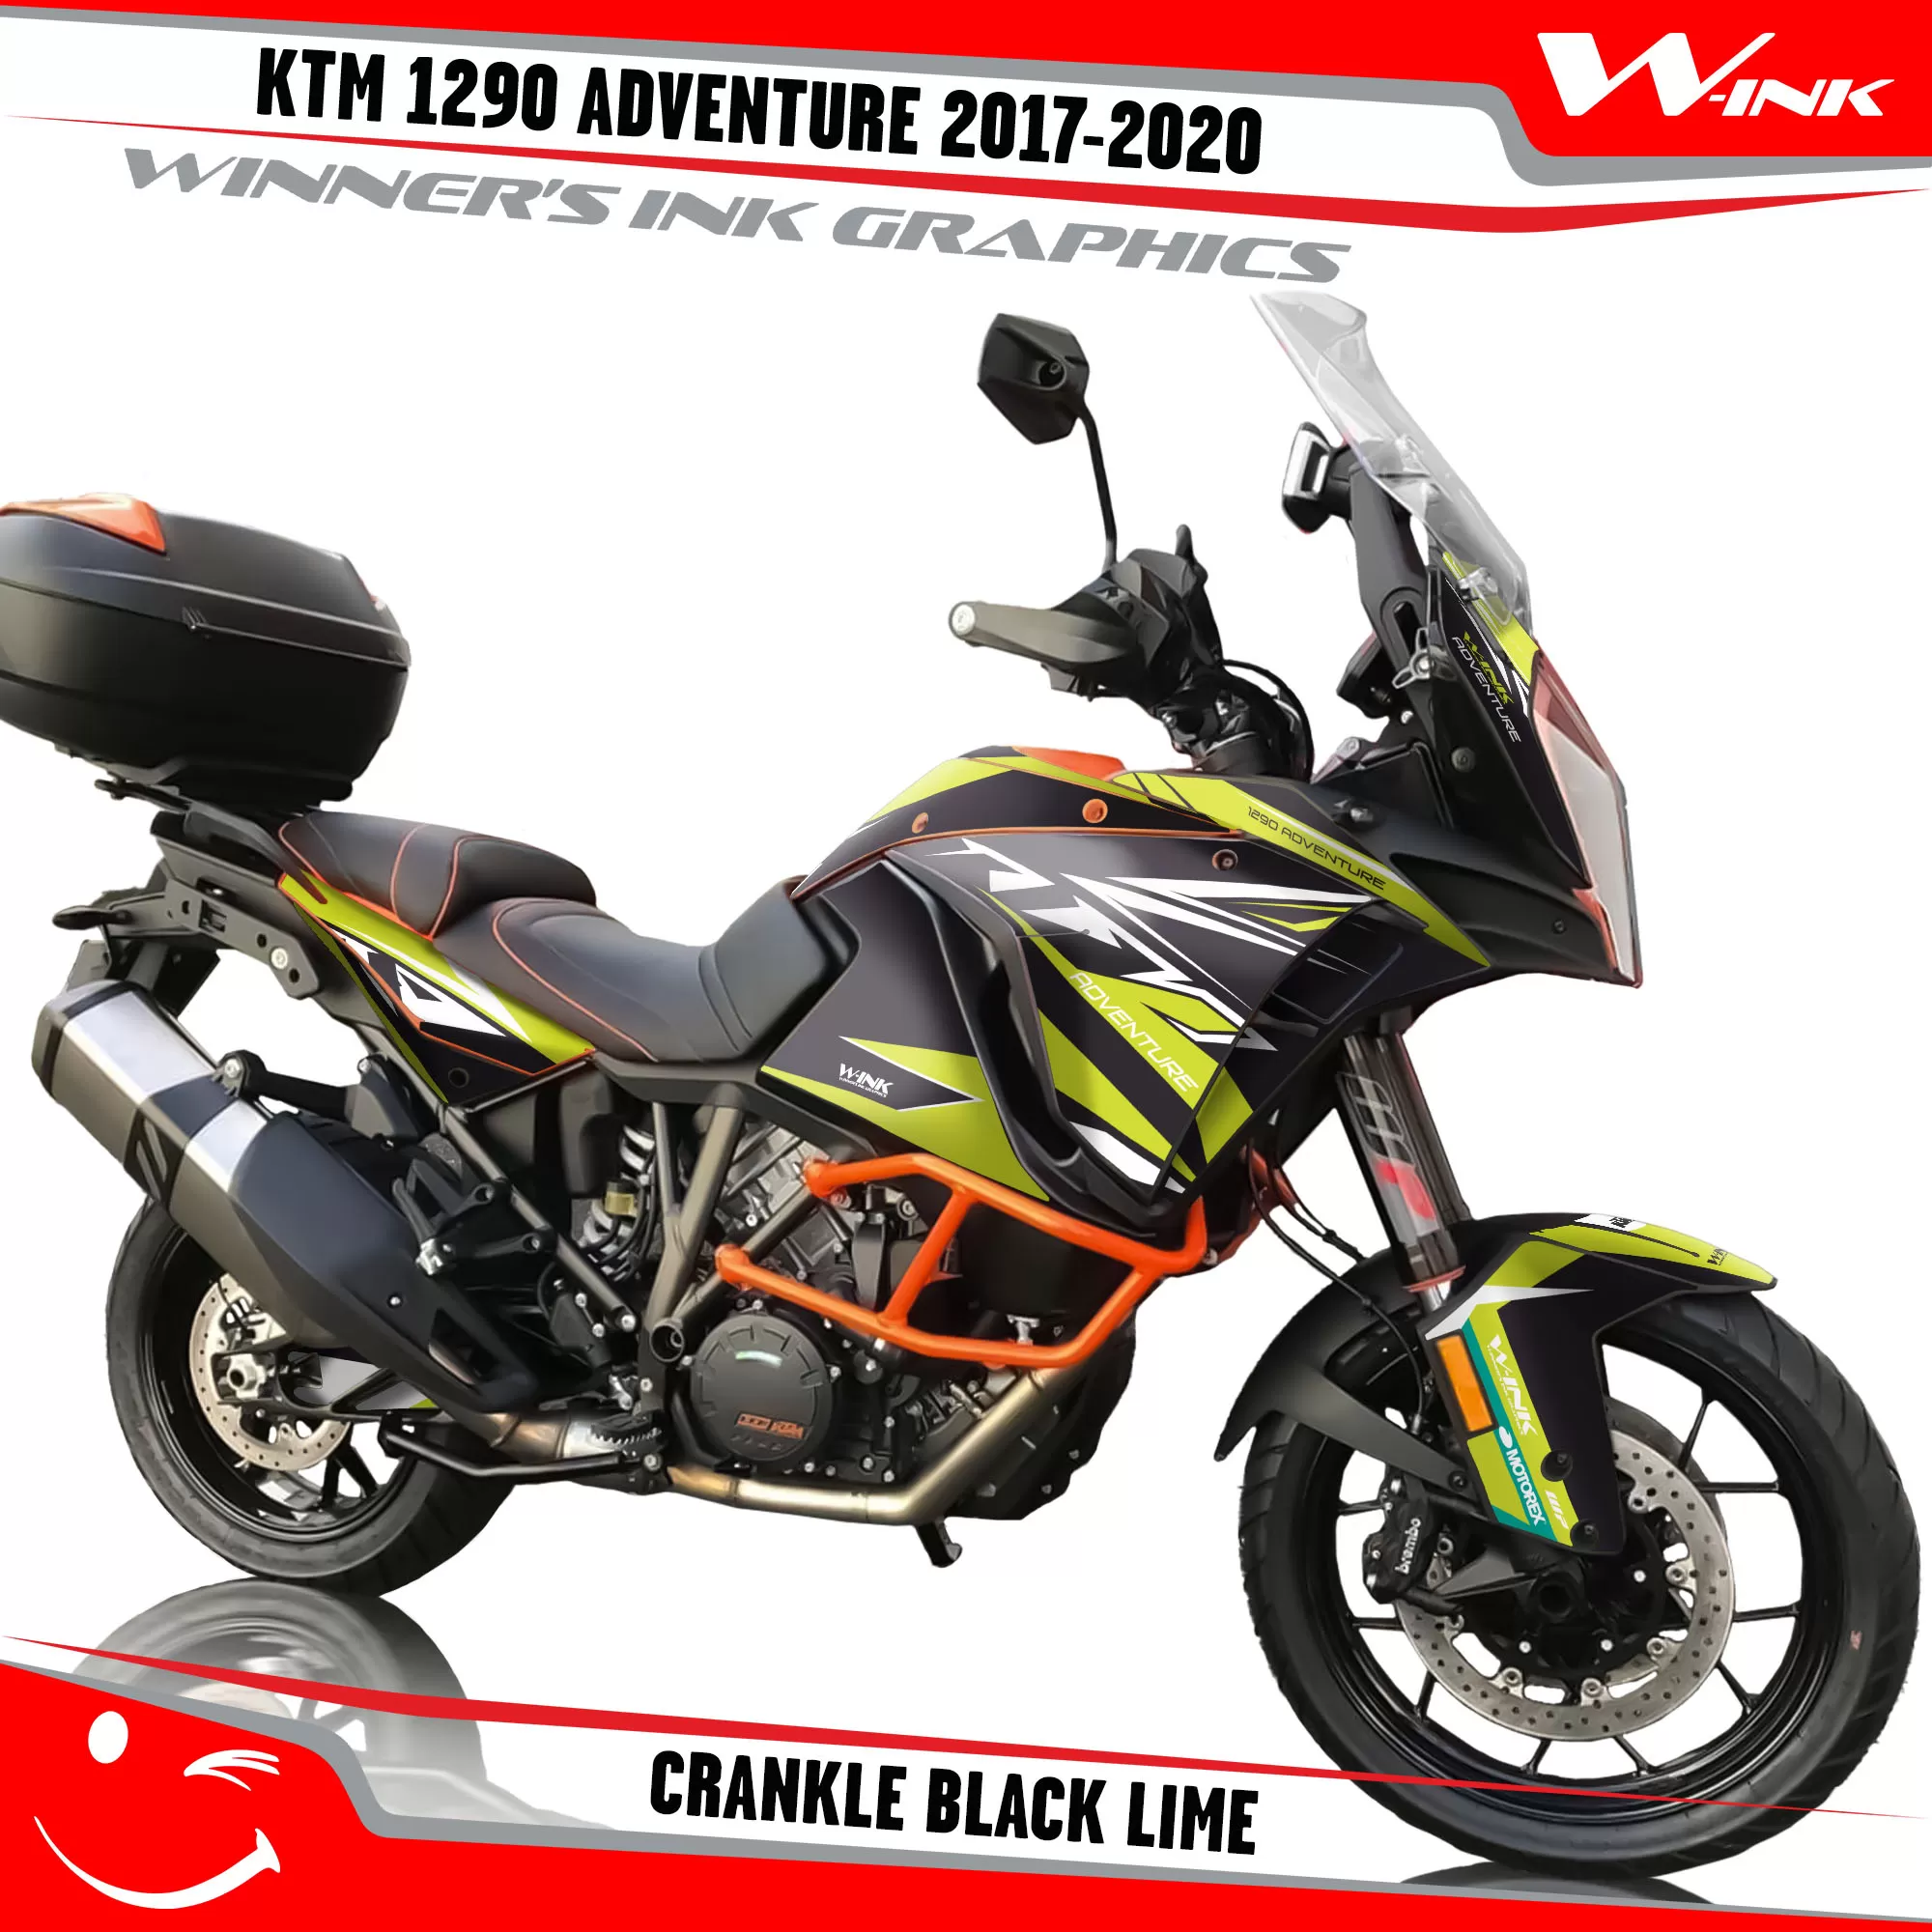 KTM-Adventure-1290-2017-2018-2019-2020-graphics-kit-and-decals-Crankle-Black-Lime